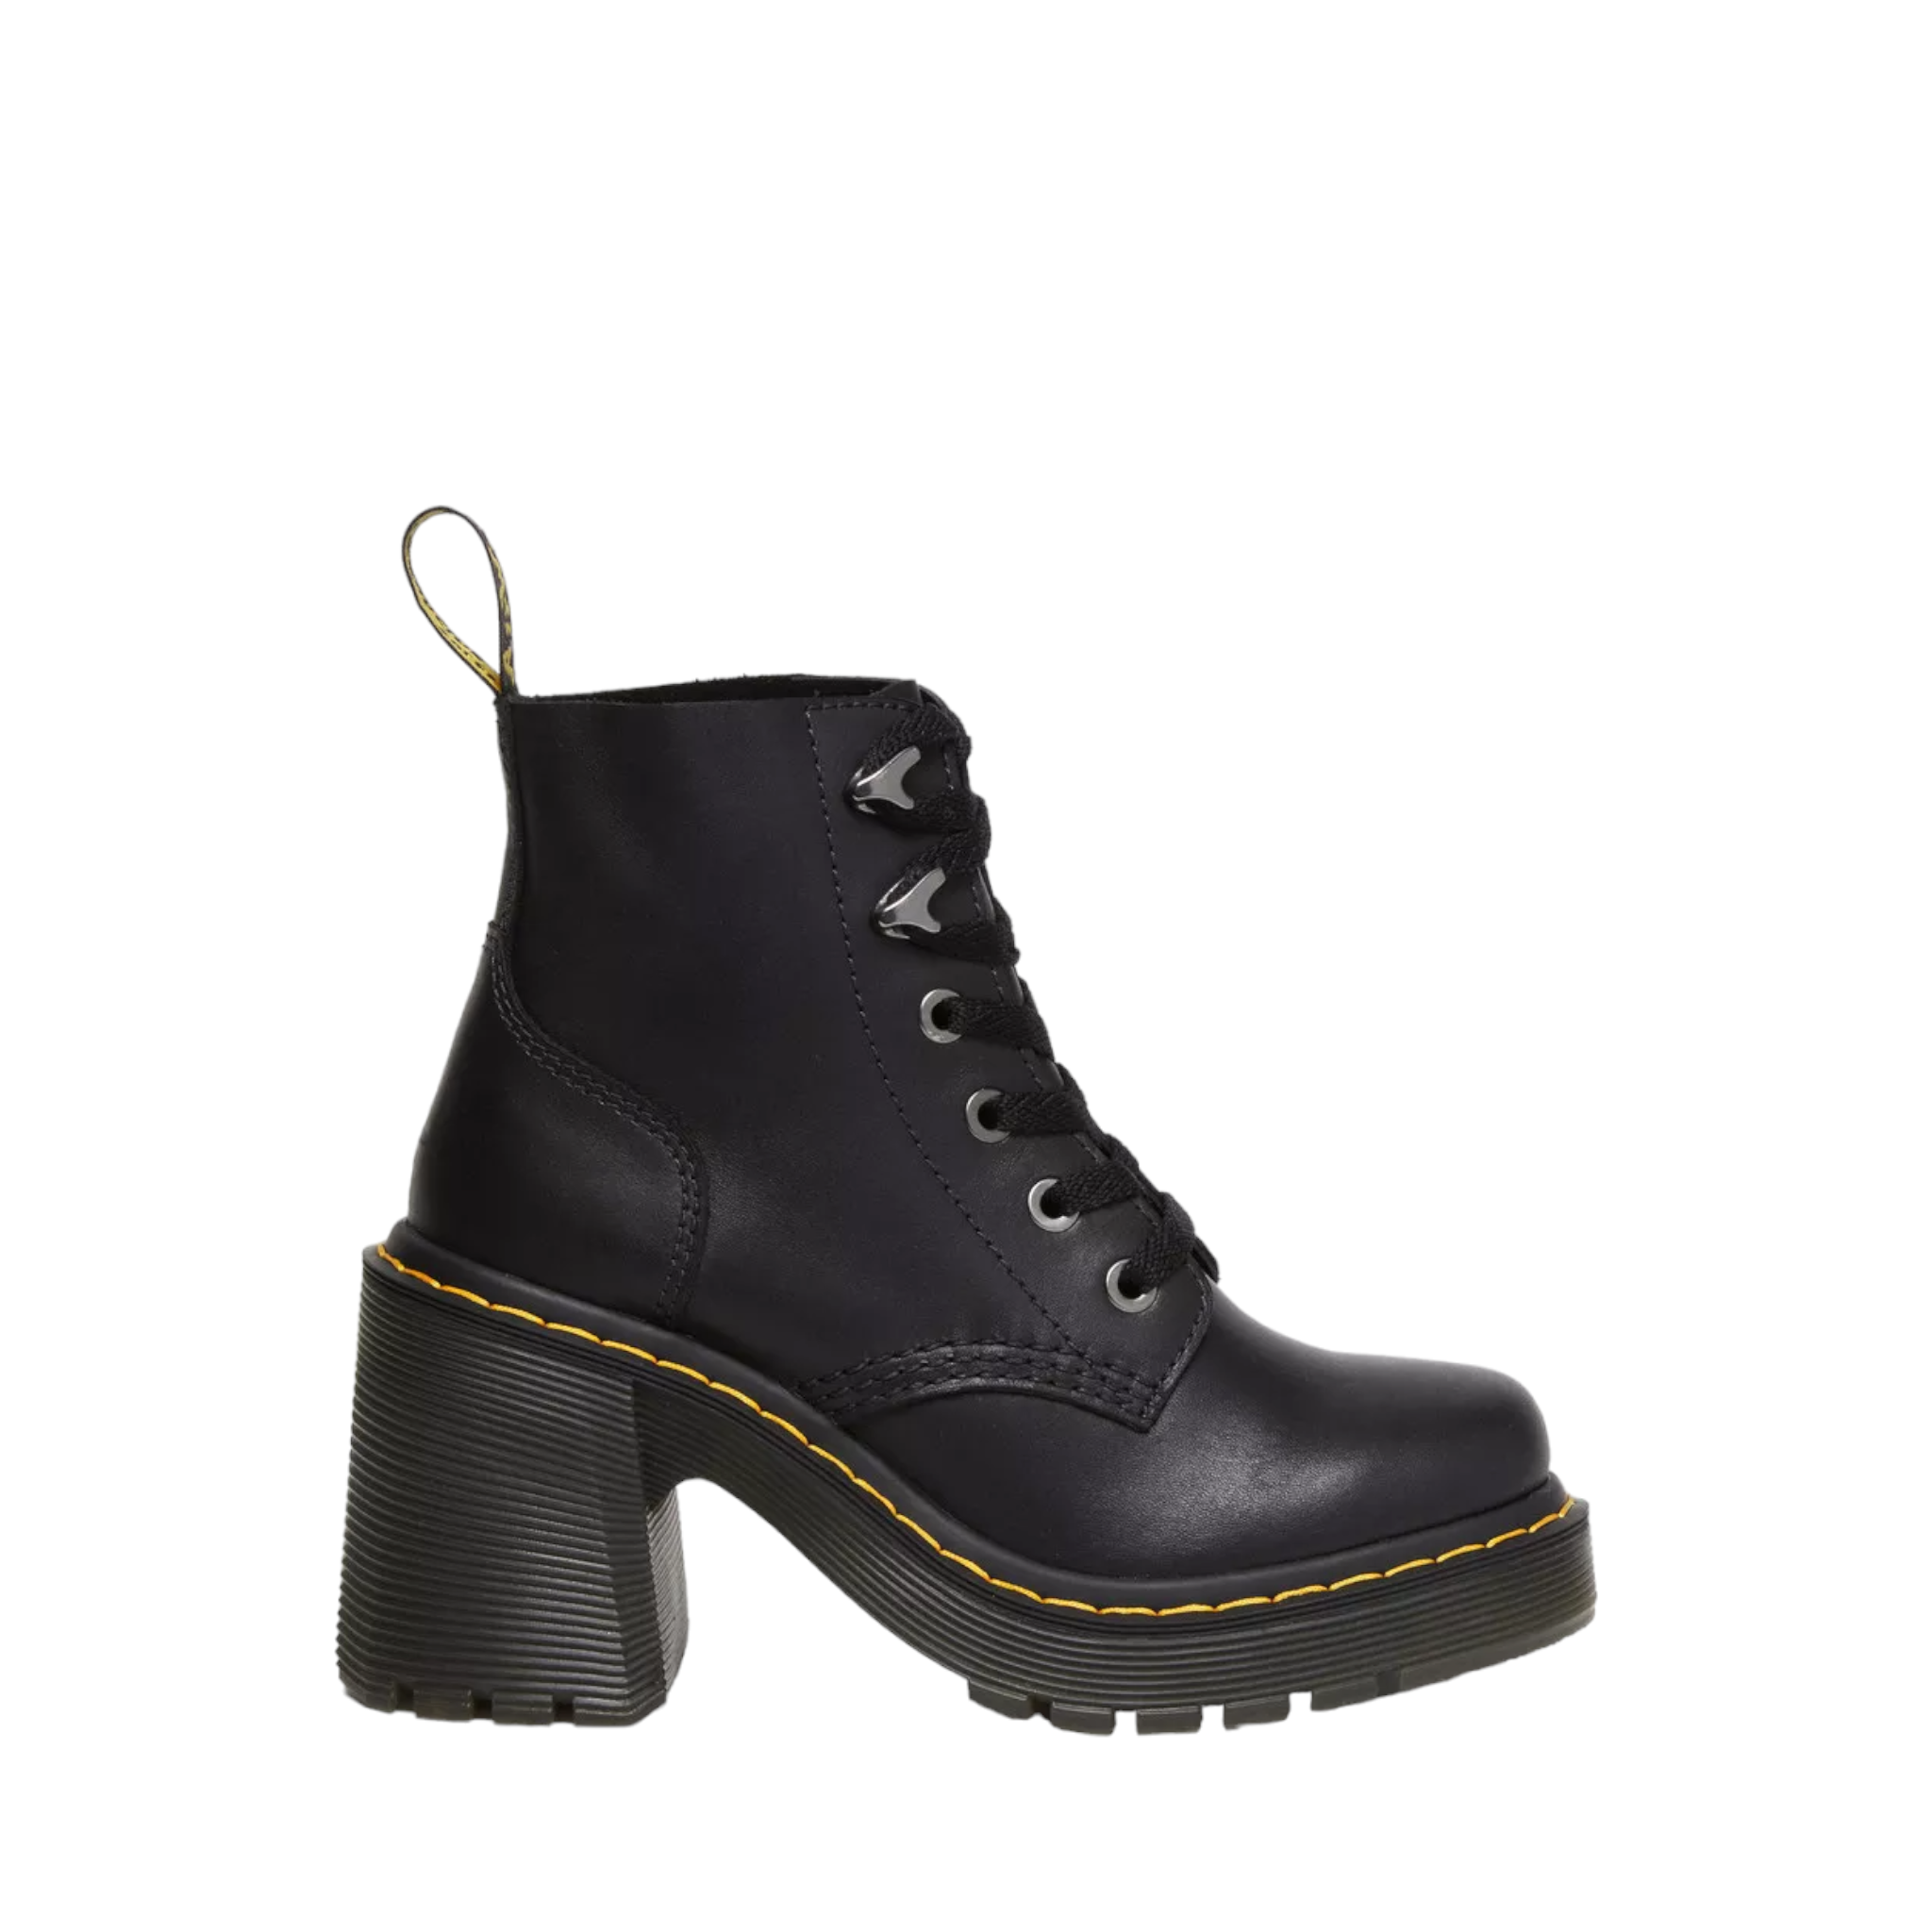 Jesy Dr. Marten Boots with heel and platform sole. Shop Online and in-store with shoe&amp;me Mount Maunganui. Iconic yellow Stitch with unique eyelets and pull-tab.